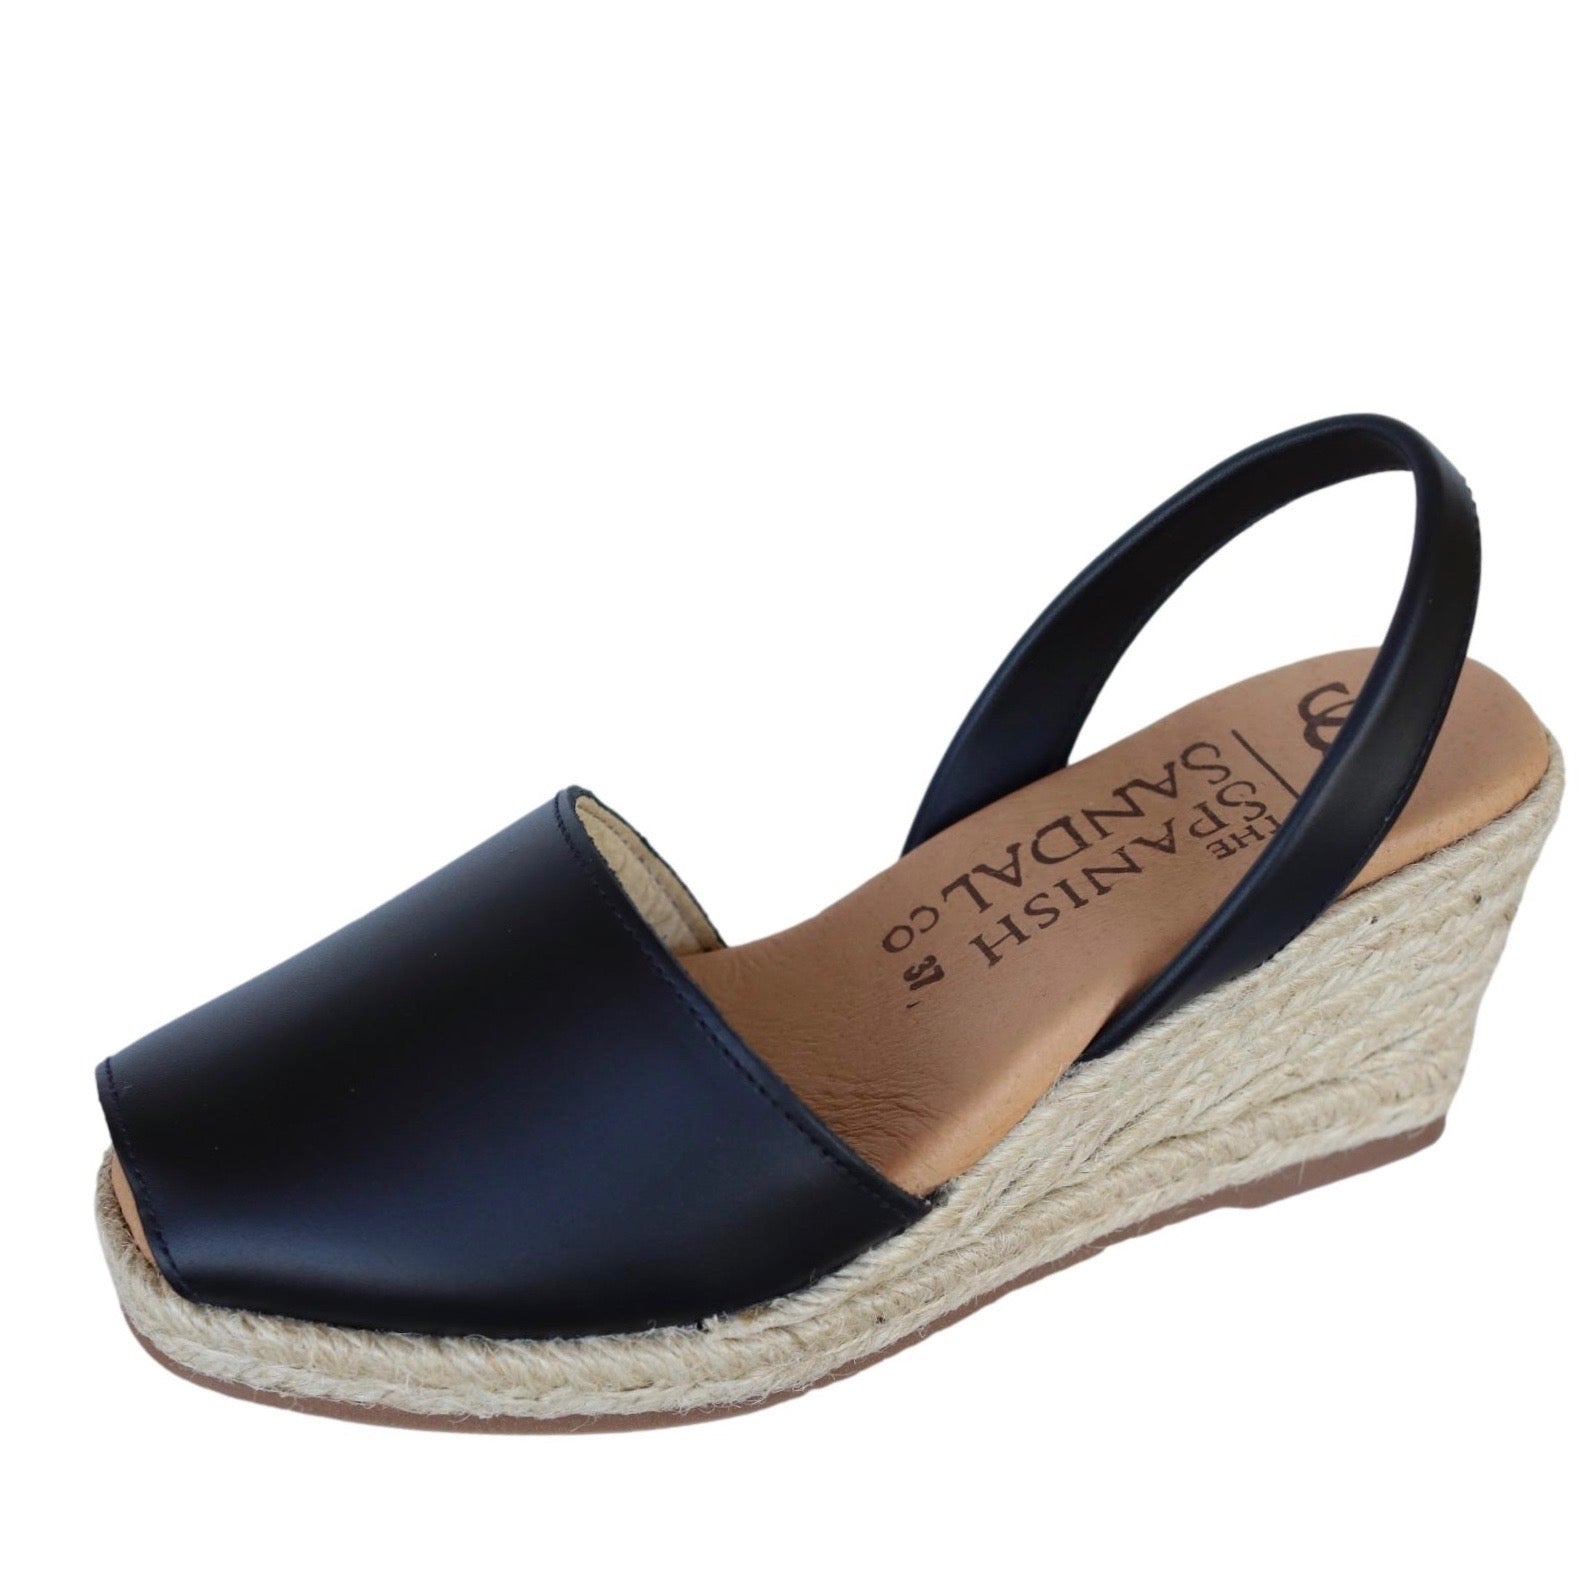 angled view of wedge espadrille sandals in black